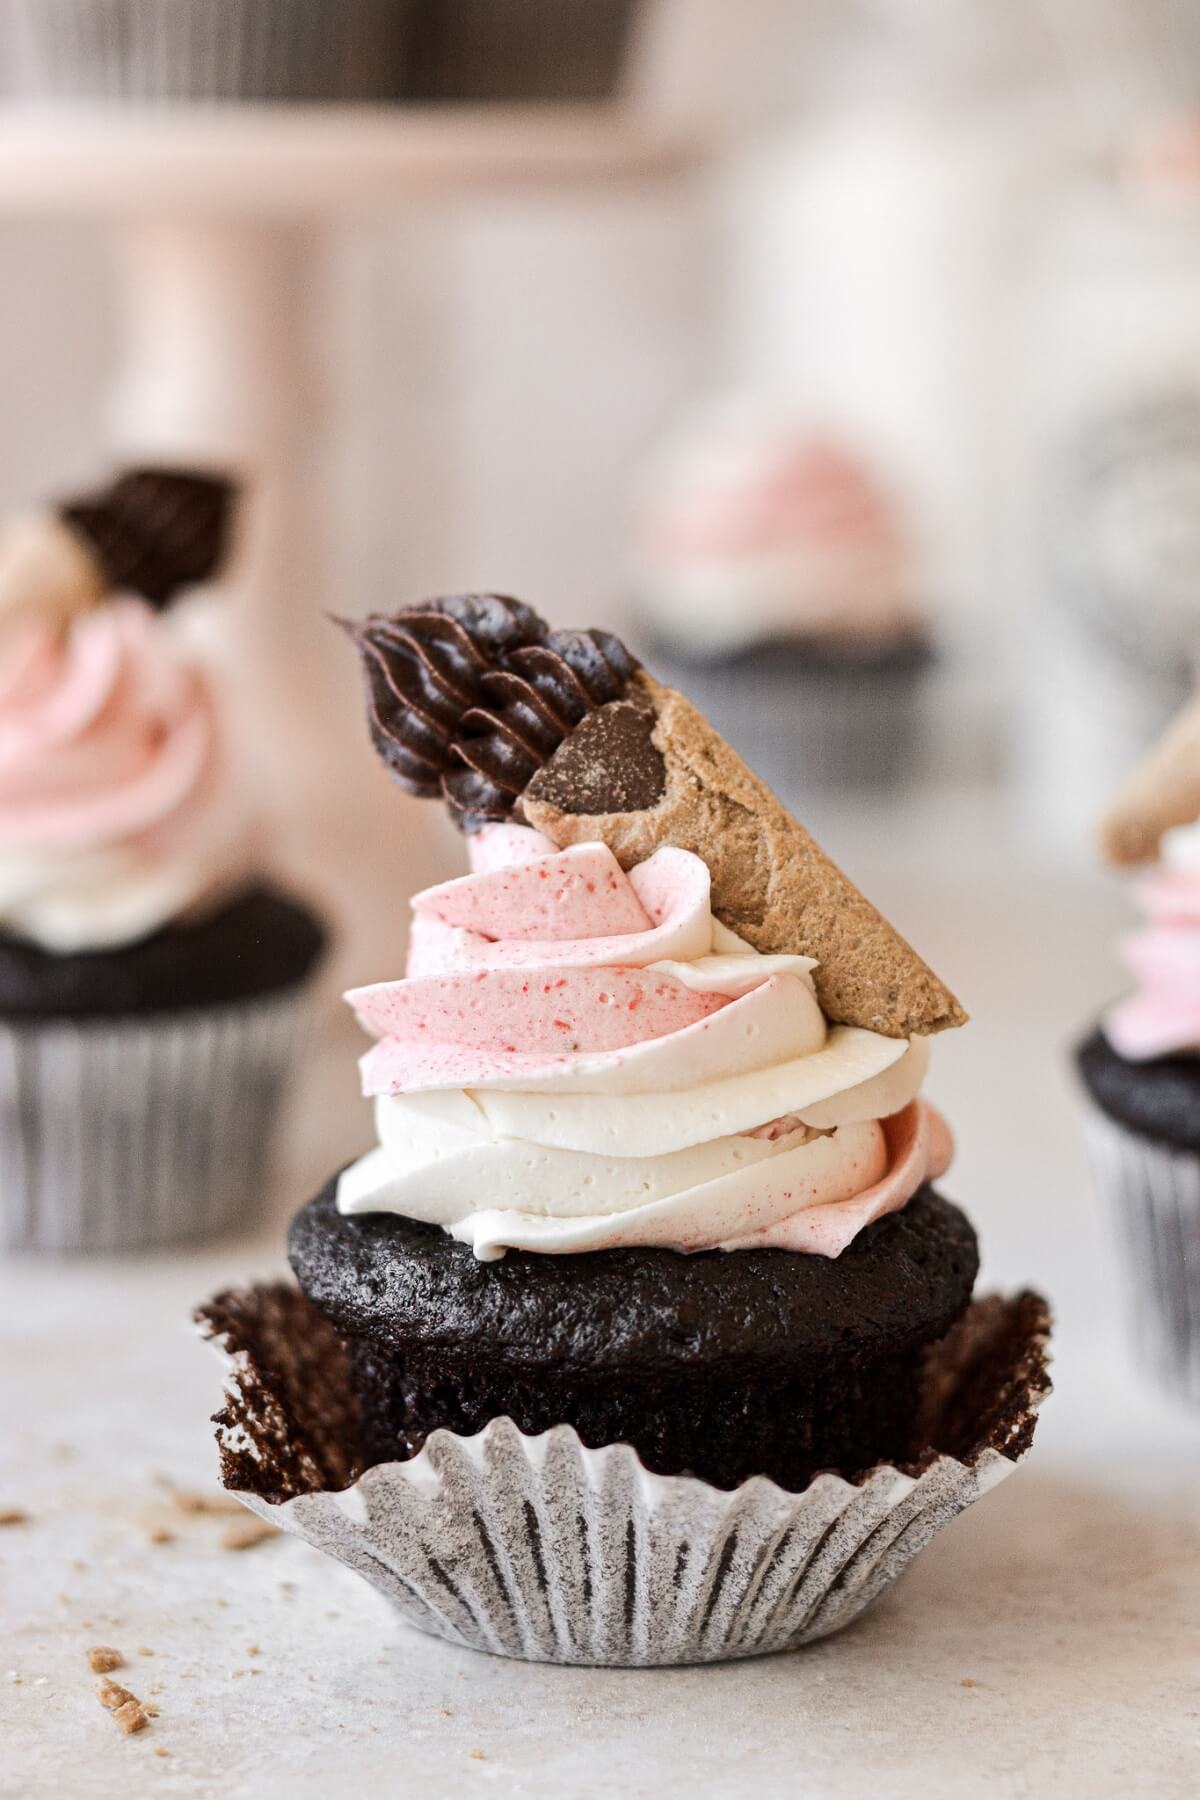 Neapolitan cupcake with the wrapper pulled back.